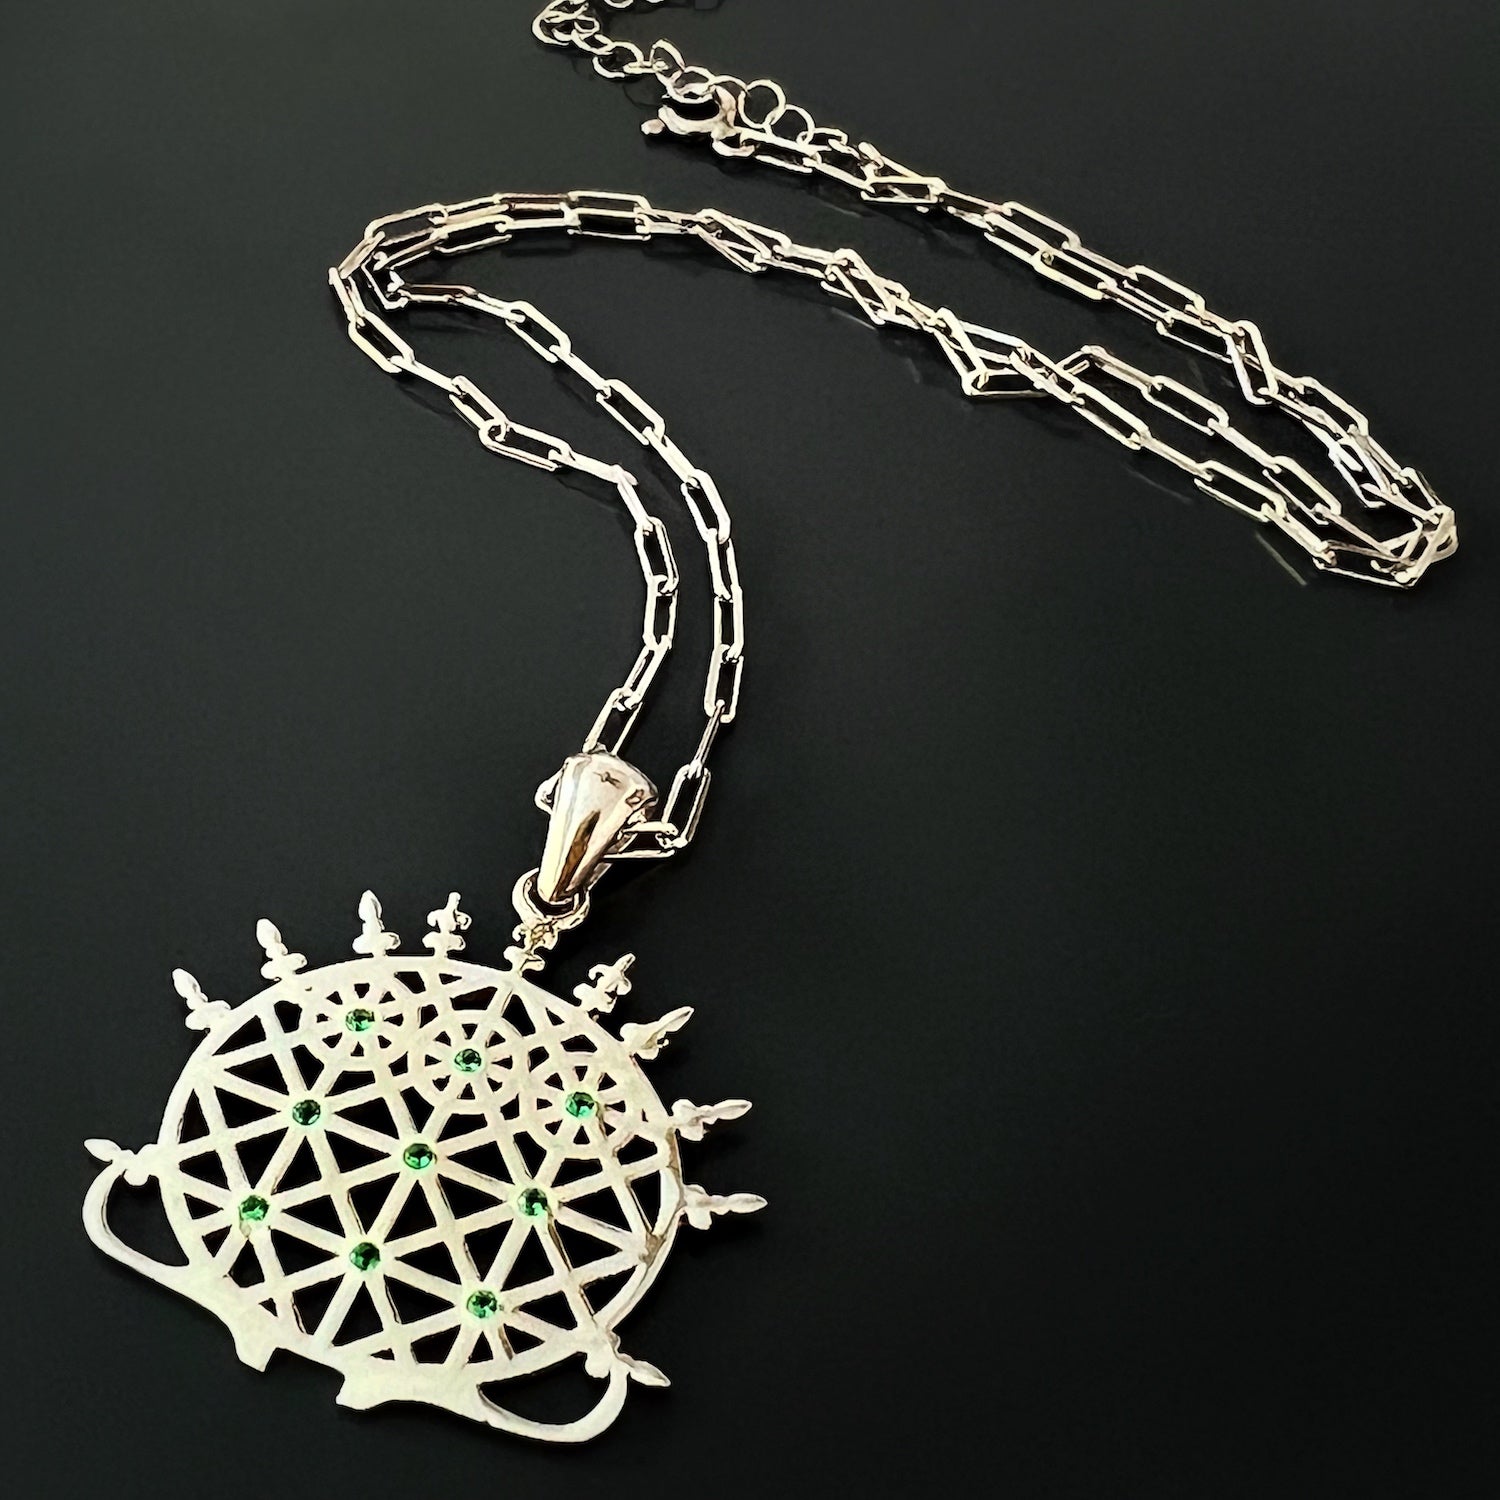 The Silver Hittite Sun Disc Necklace, a versatile piece that can be worn for both casual and formal occasions, adding a touch of elegance and significance to any outfit.